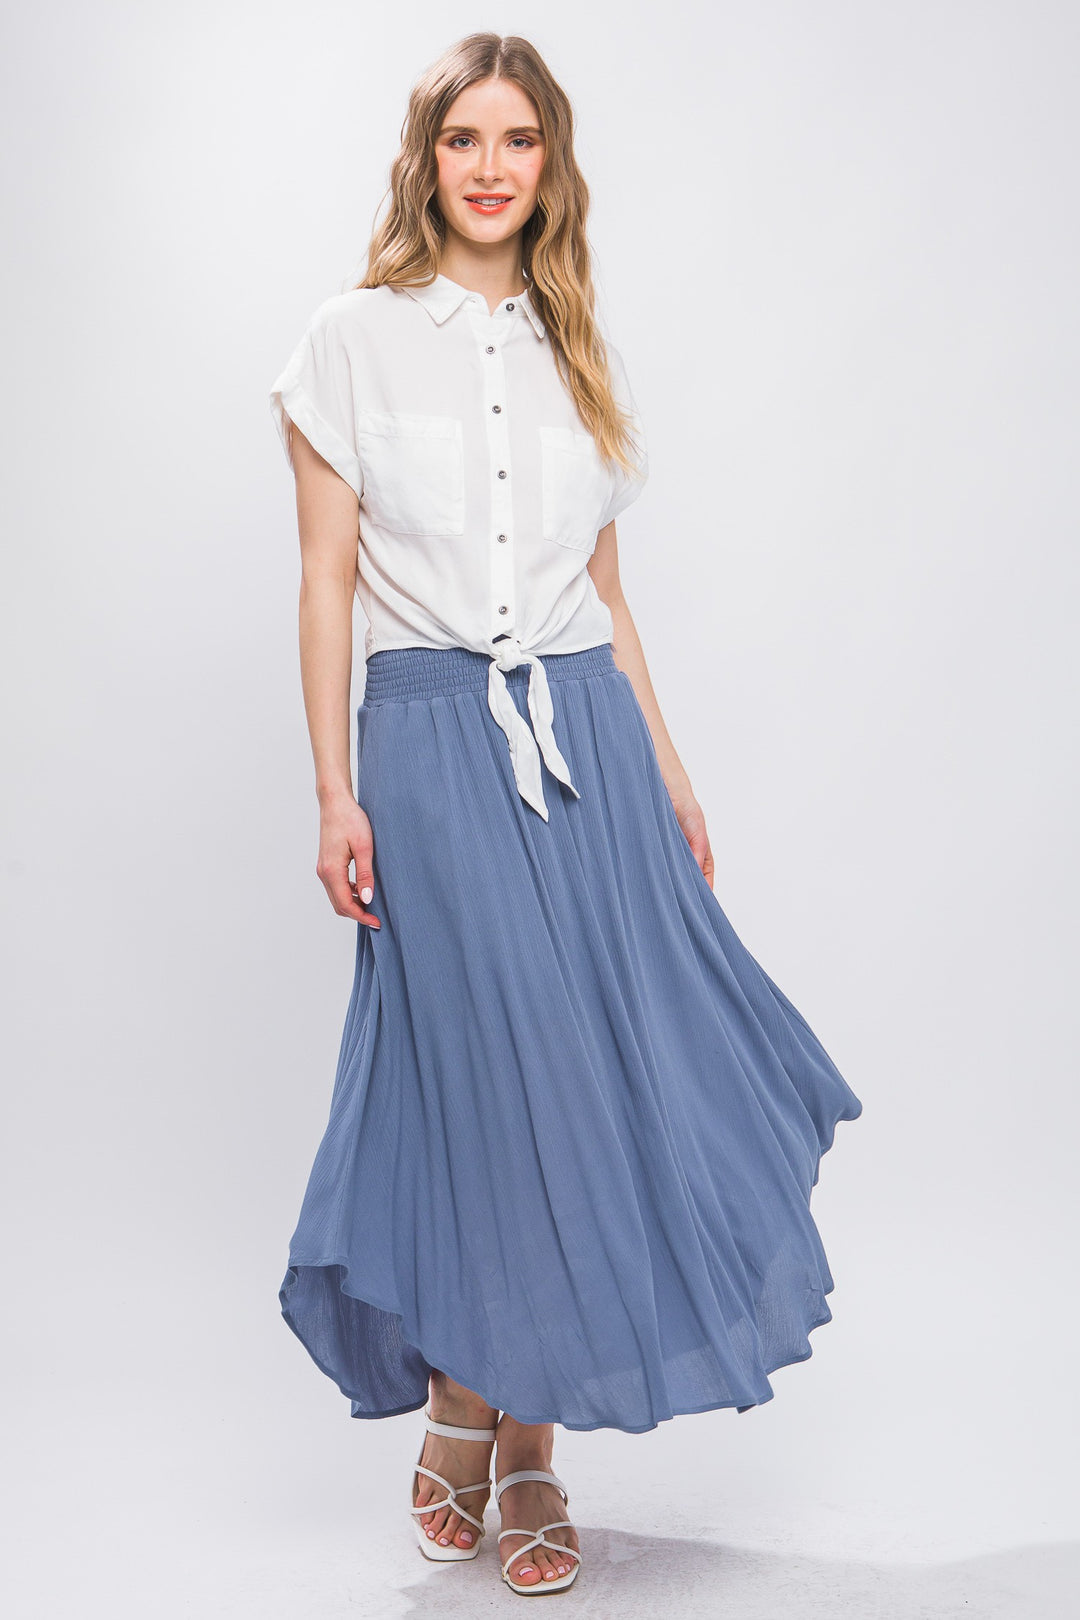 Flowy Maxi Skirt With Pockets